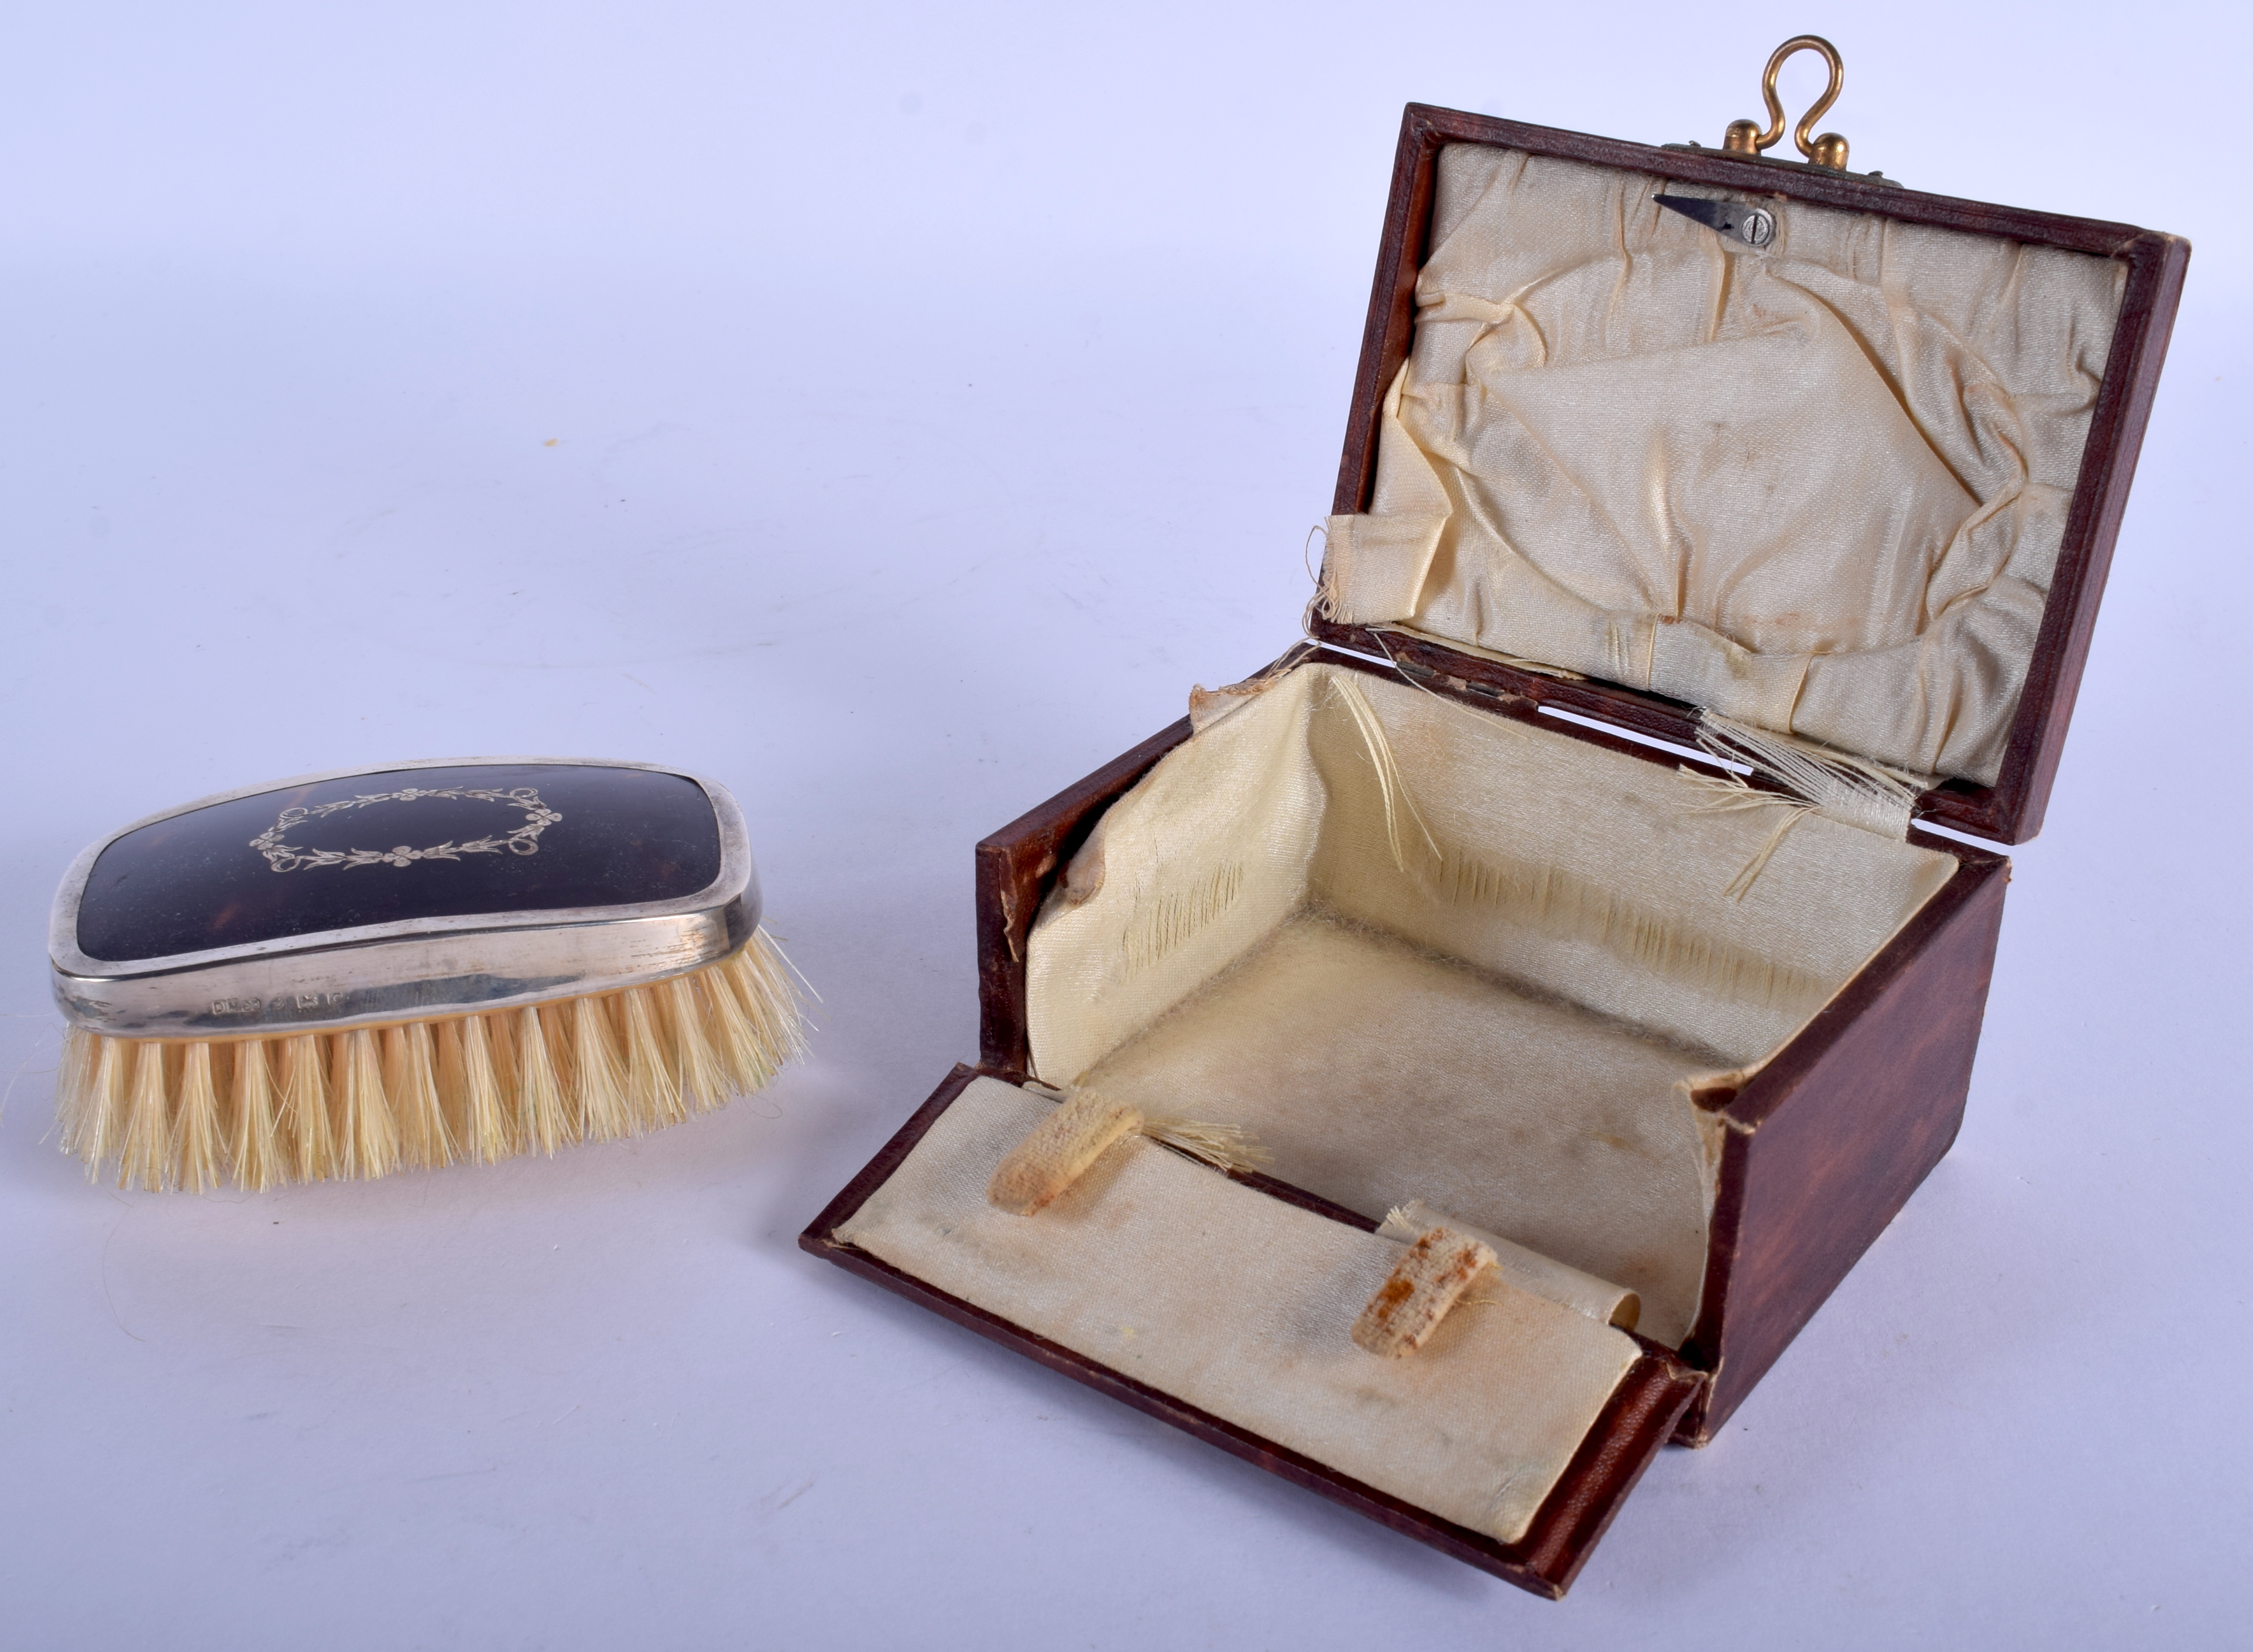 A BOXED ANTIQUE SILVER AND TORTOISESHELL BRUSH. 8 cm x 4.5 cm.